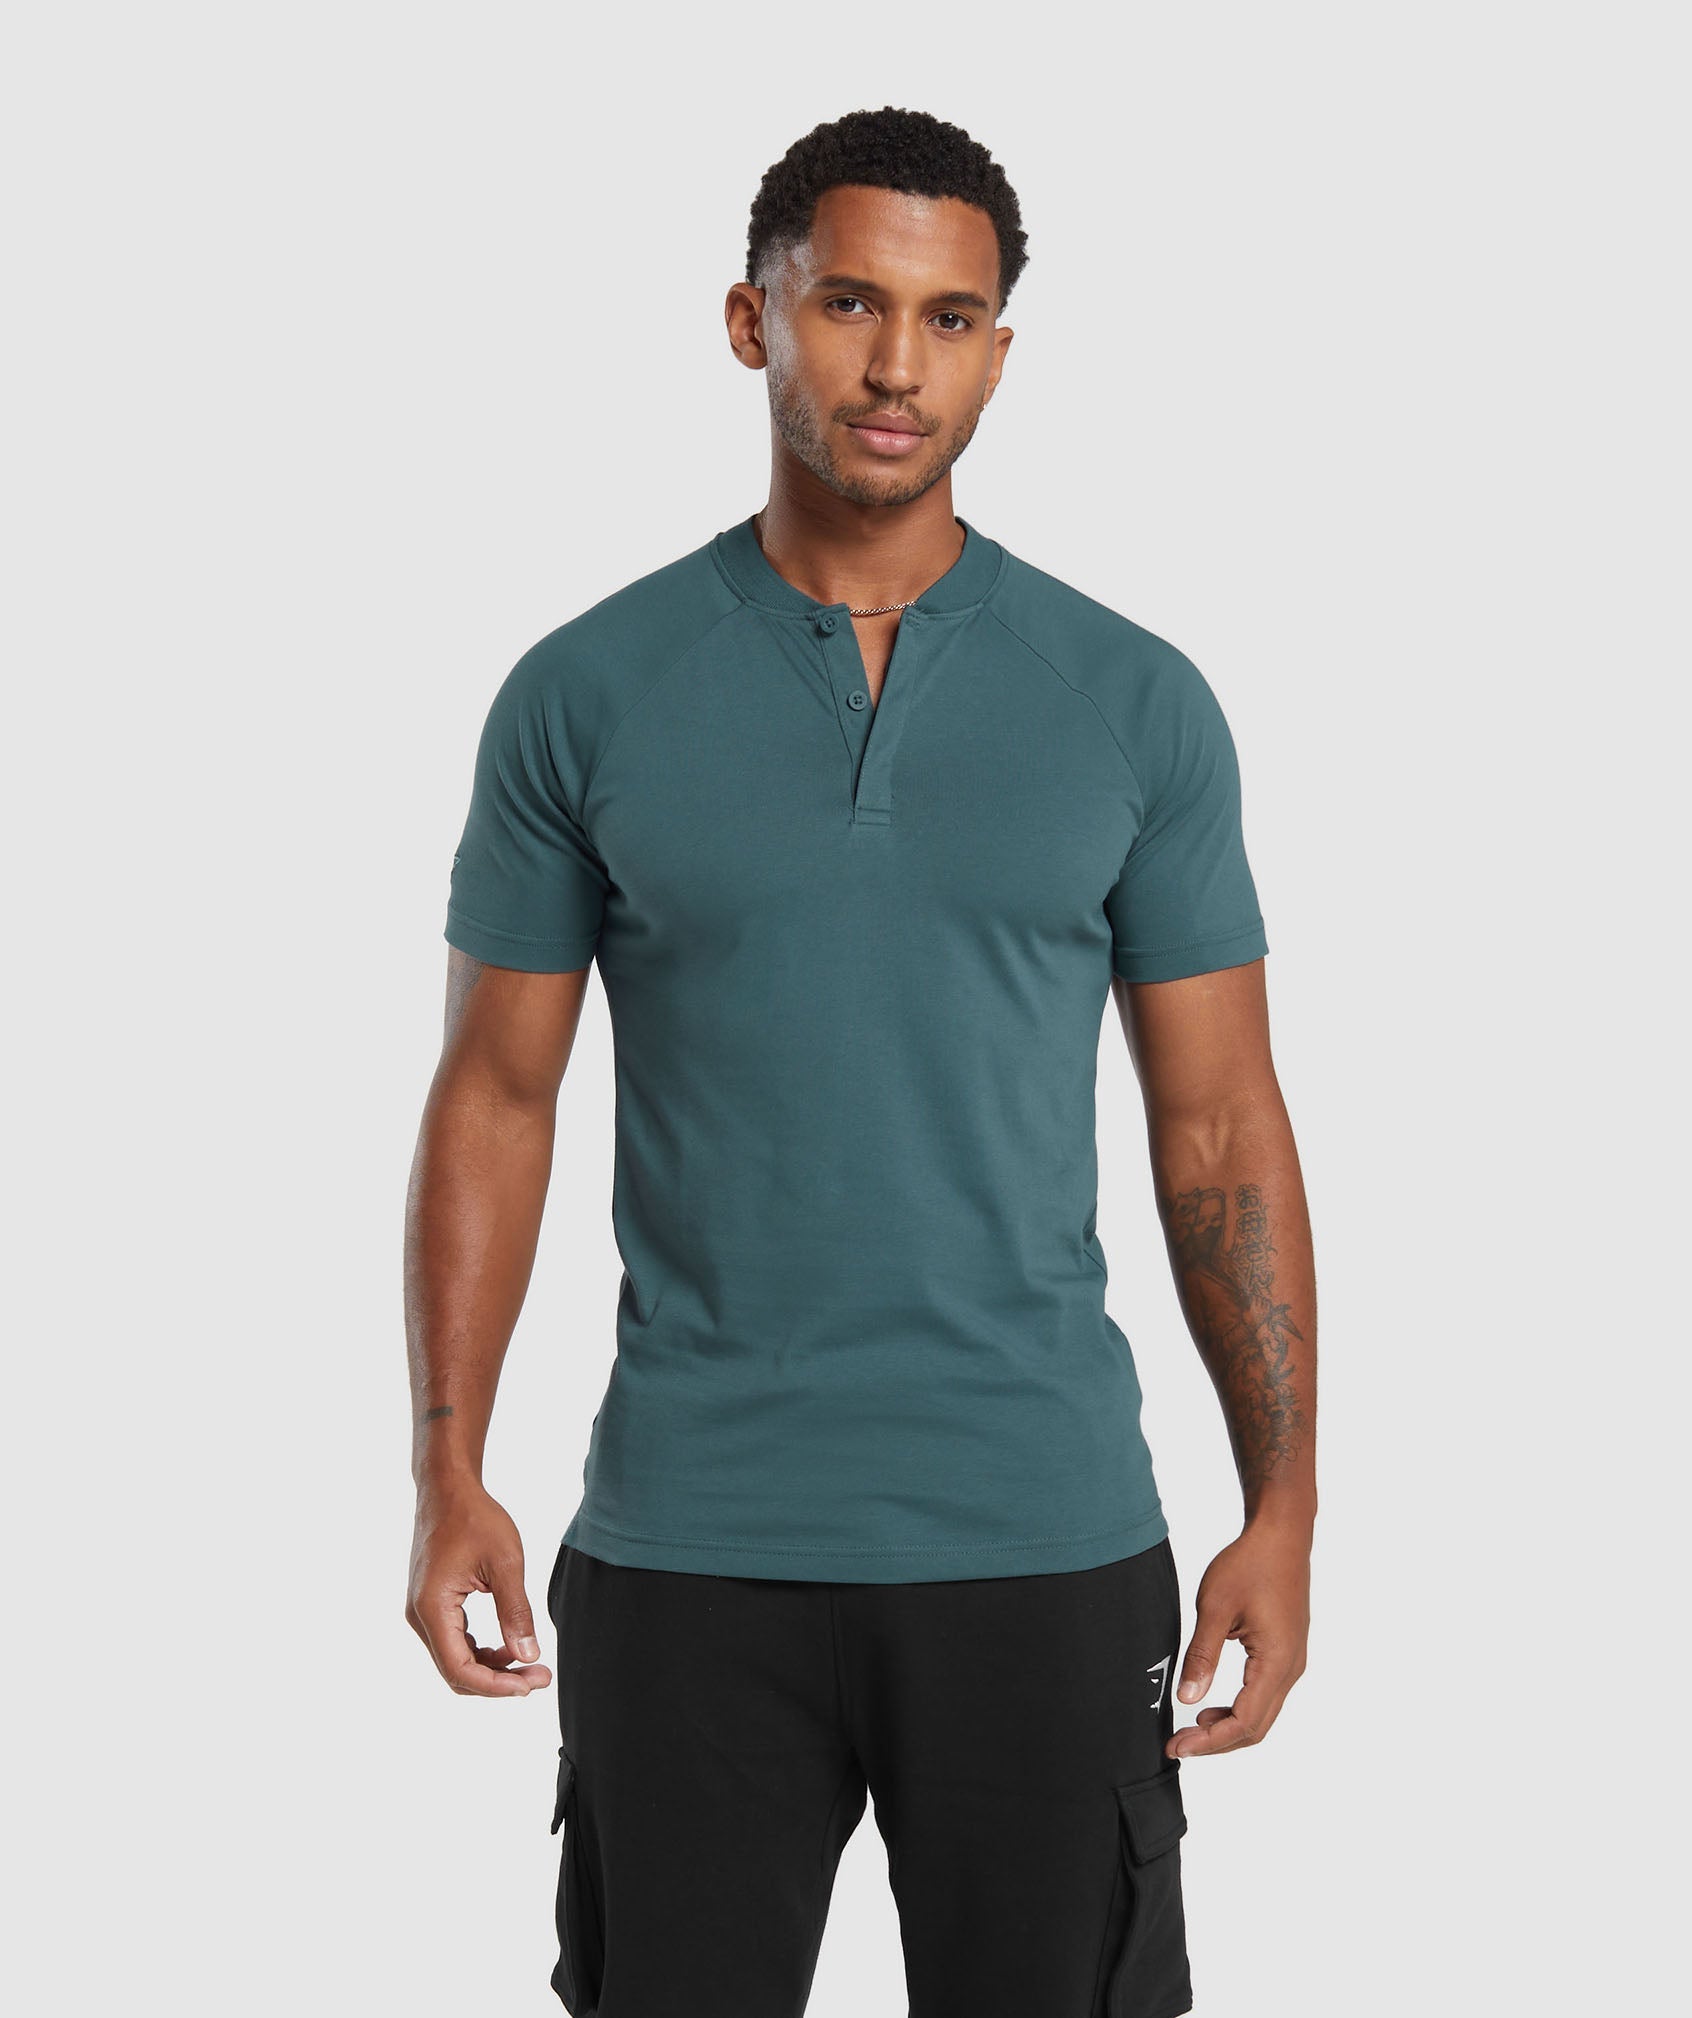 Rest Day Commute Polo Shirt in Smokey Teal